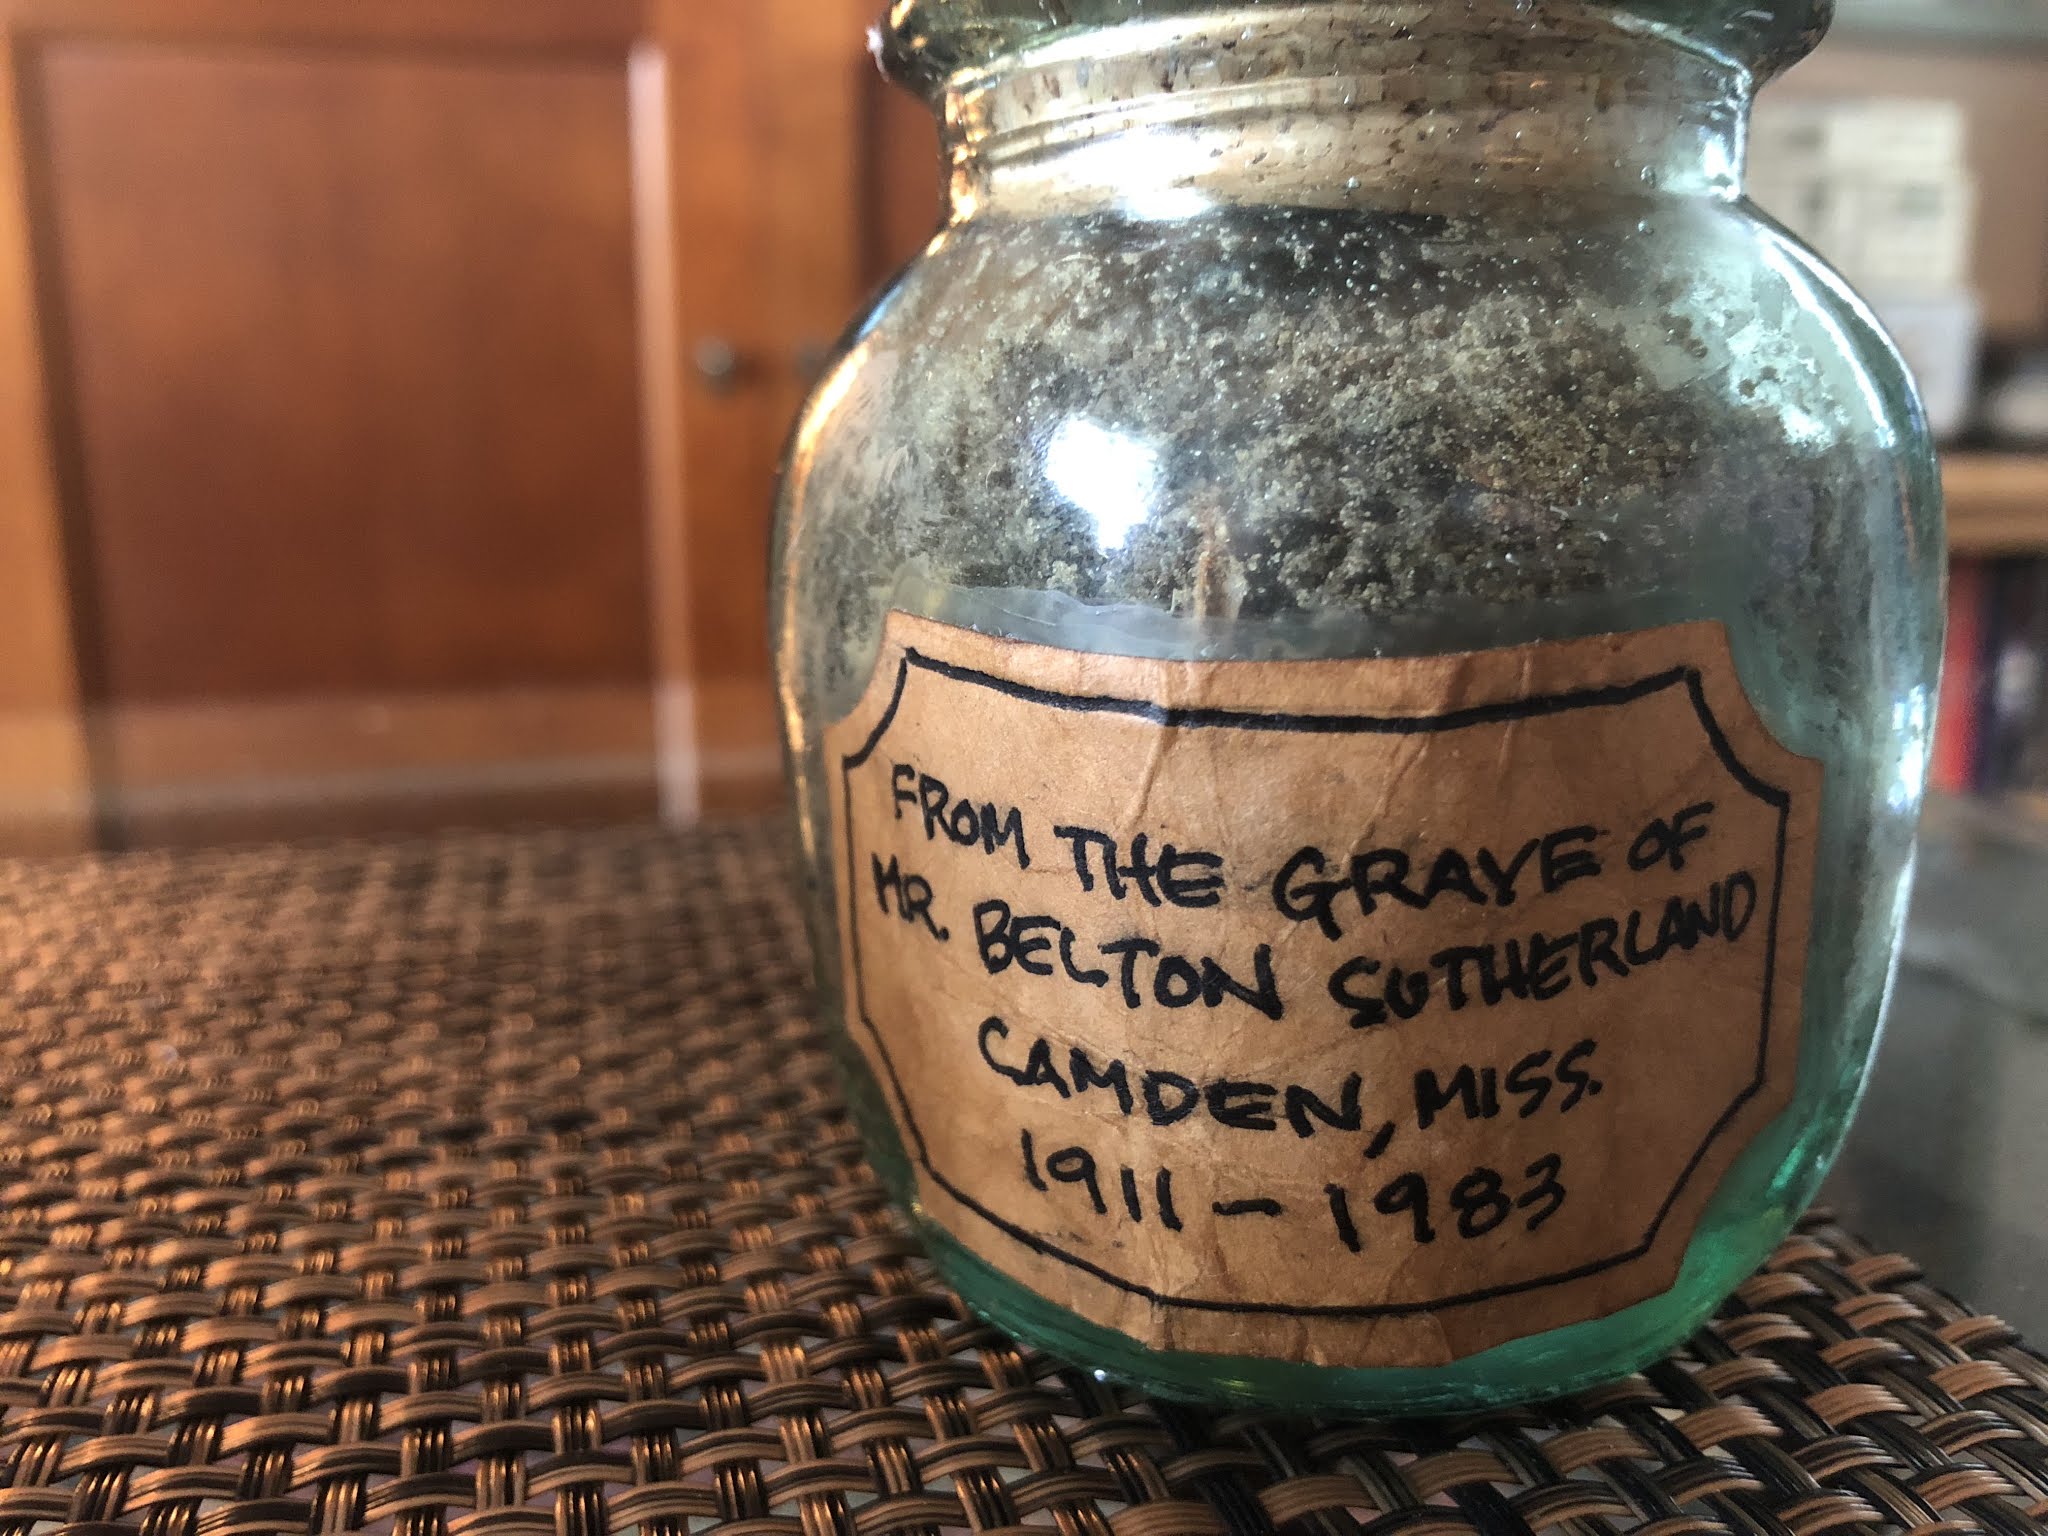 Glass container of dirt from the grave of Belton Sutherland. Given by Joe Austin to the Mt. Zion Memorial Fund